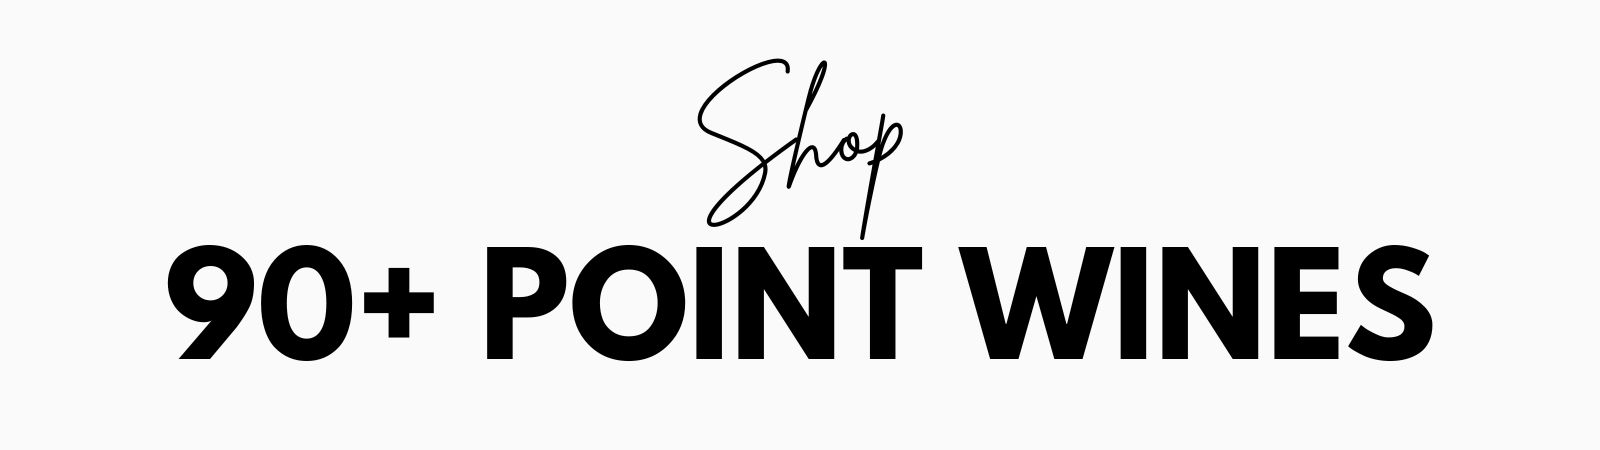 SHOP 90+ POINT WINES